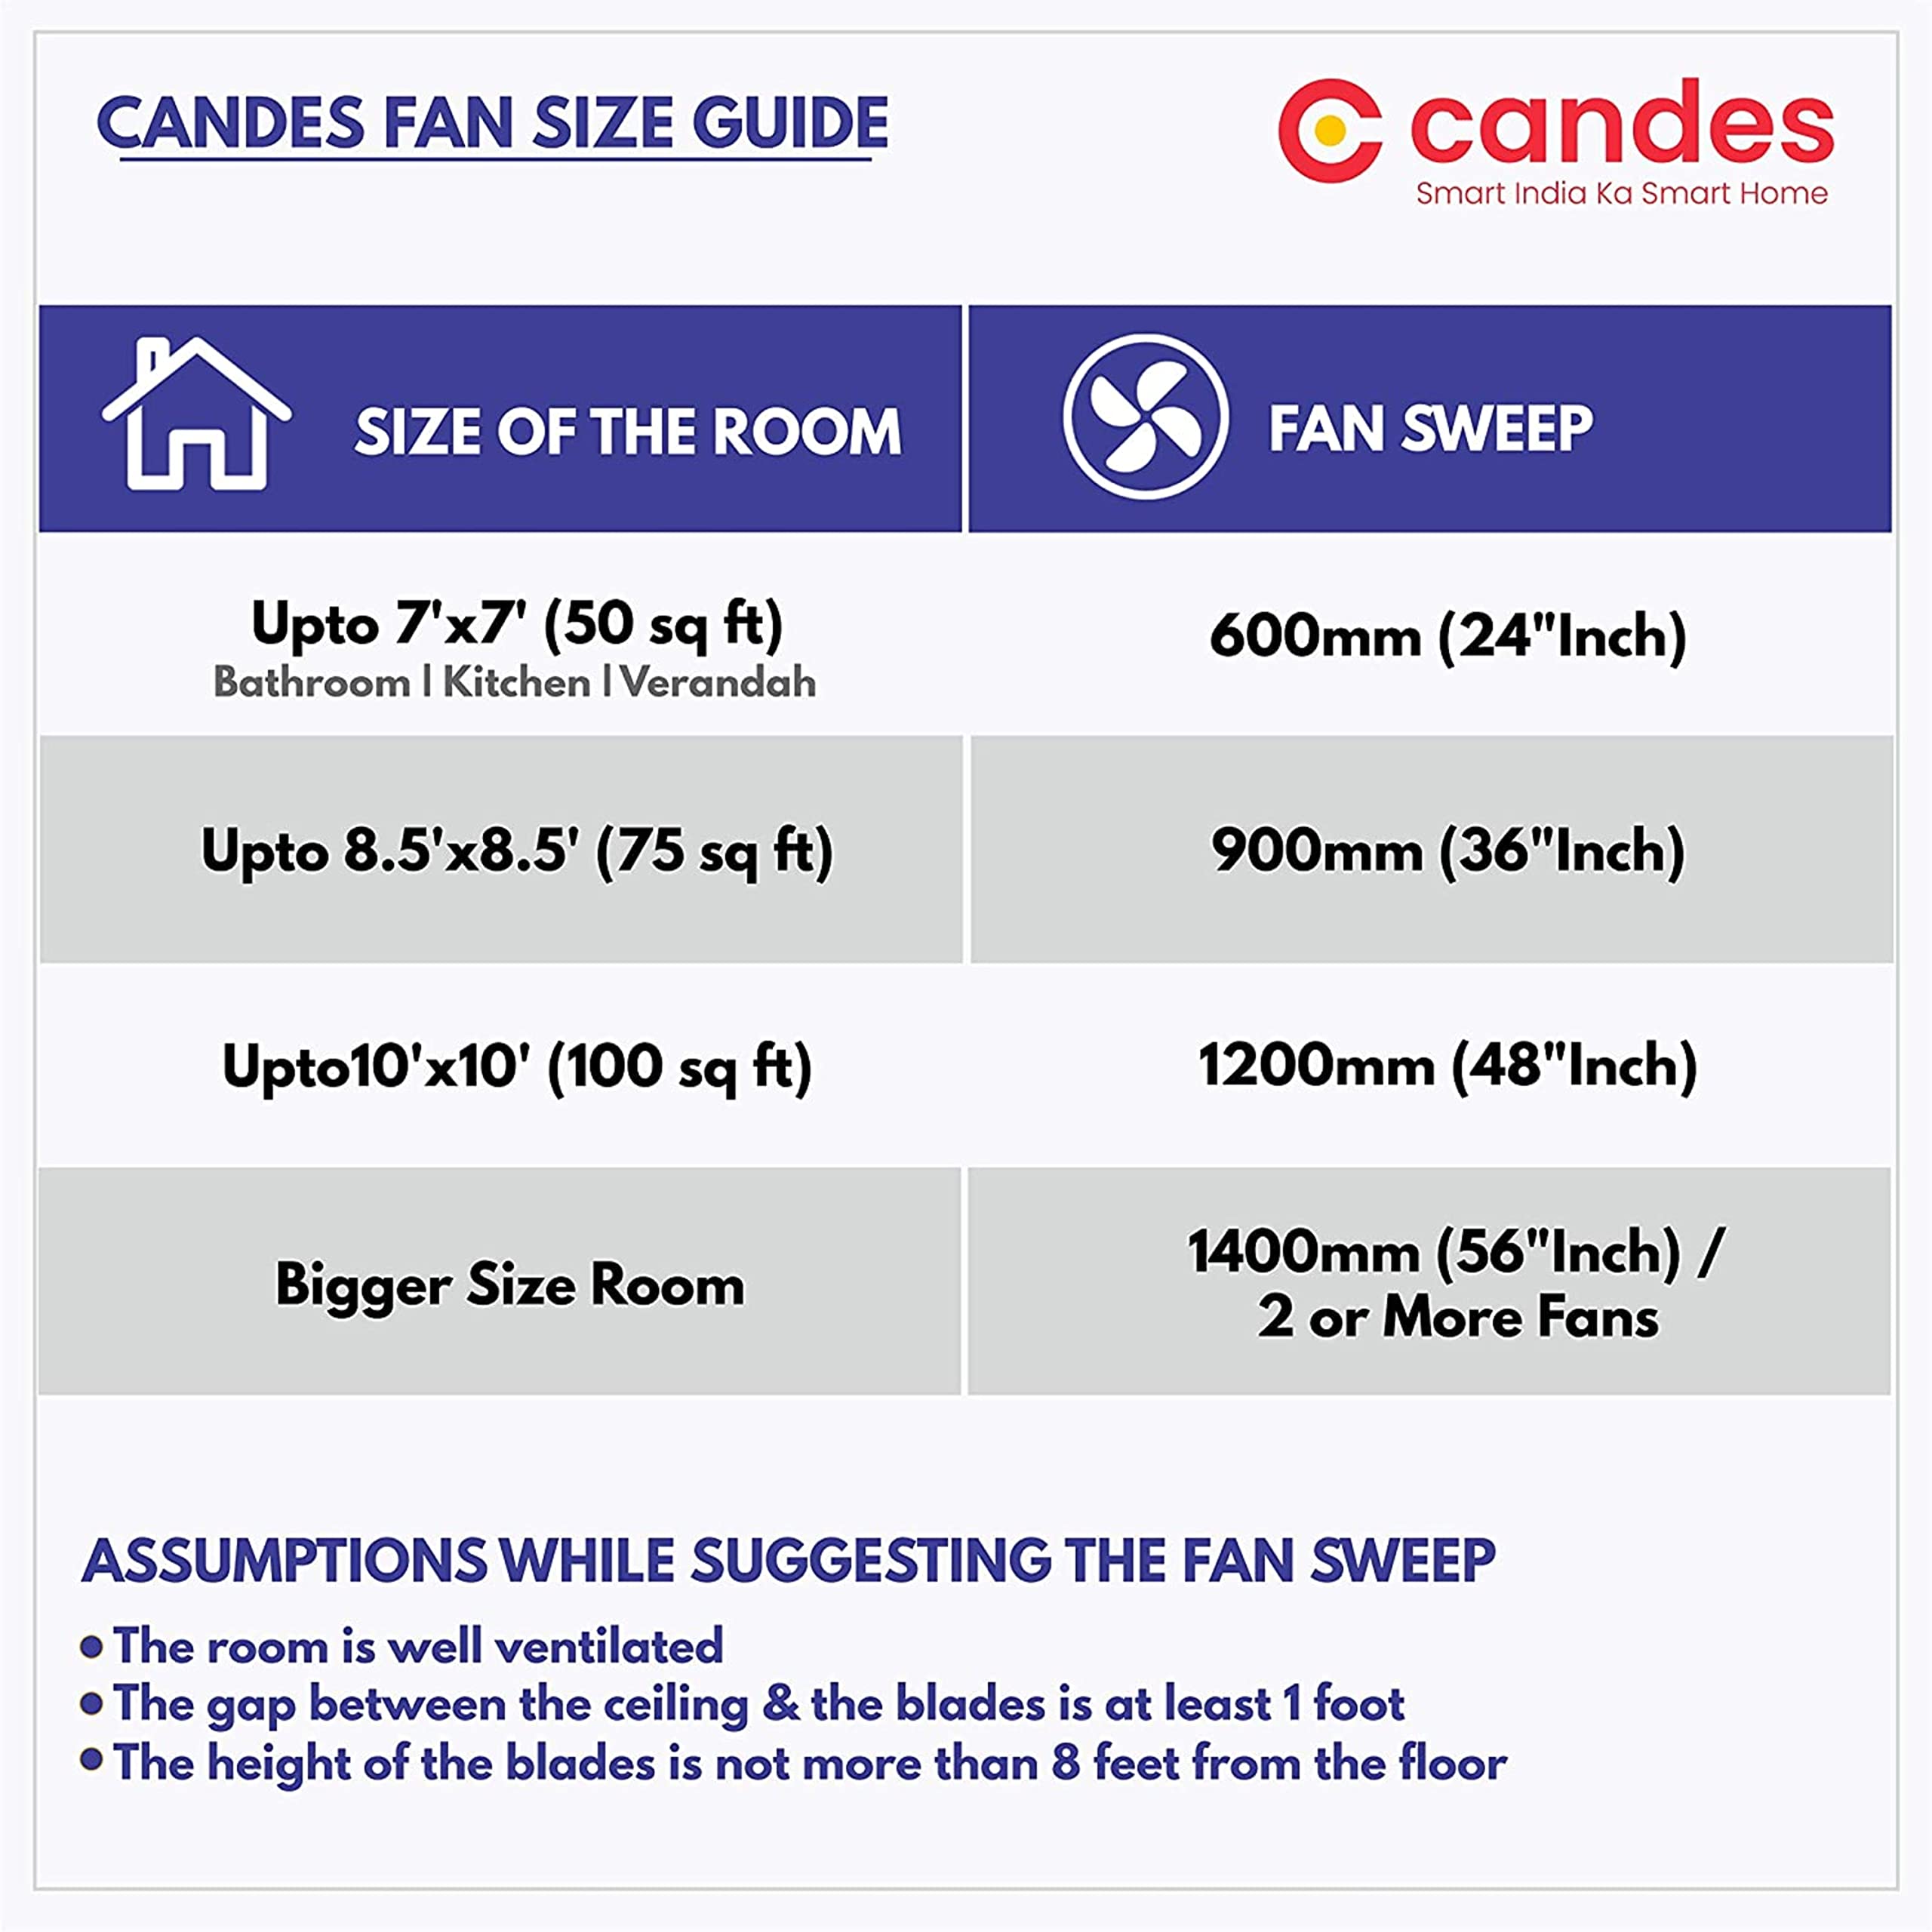 Candes Breeza 1200mm/48 inch High Speed Anti dust Decorative 5 Star Rated Ceiling Fan 400 RPM with 3 Years Warranty (Pack of 1,Coffee Brown) (Ivory, Pack of 2)